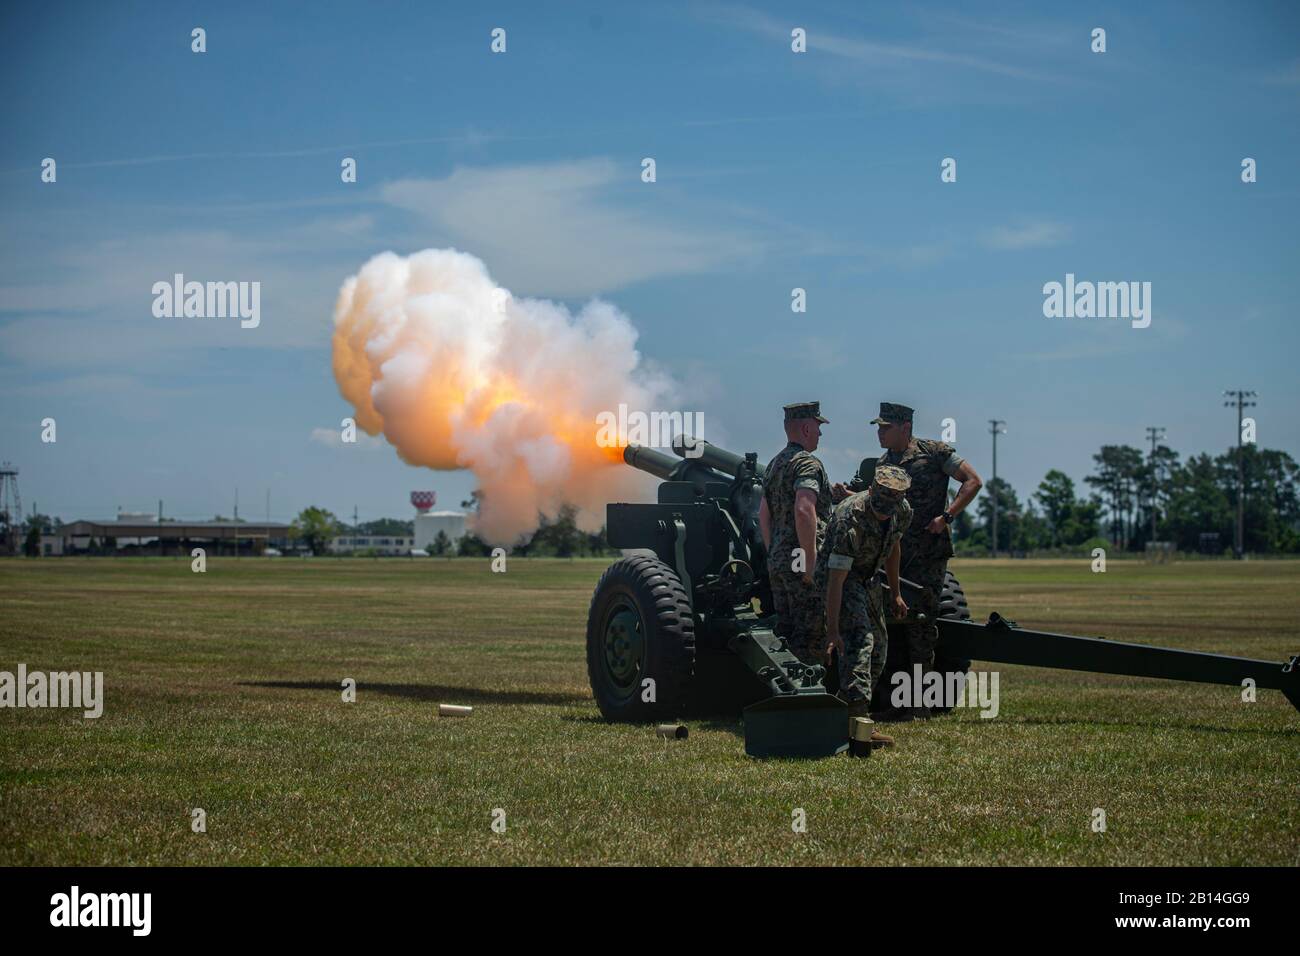 U.S. Marines with Echo Battery, 2nd Battalion, 10th Marine Regiment, 2nd Marine Division, host a 21-Gun Salute on Camp Lejeune, North Carolina, May 27, 2019. The 21-Gun Salute, held in honor of Memorial Day in accordance with Naval Regulations, is a ceremony during which guns are dischared 21 times at one minute intervals. (U.S. Marine Corps photo by Lance Cpl. Nathaniel Q. Hamilton) Stock Photo